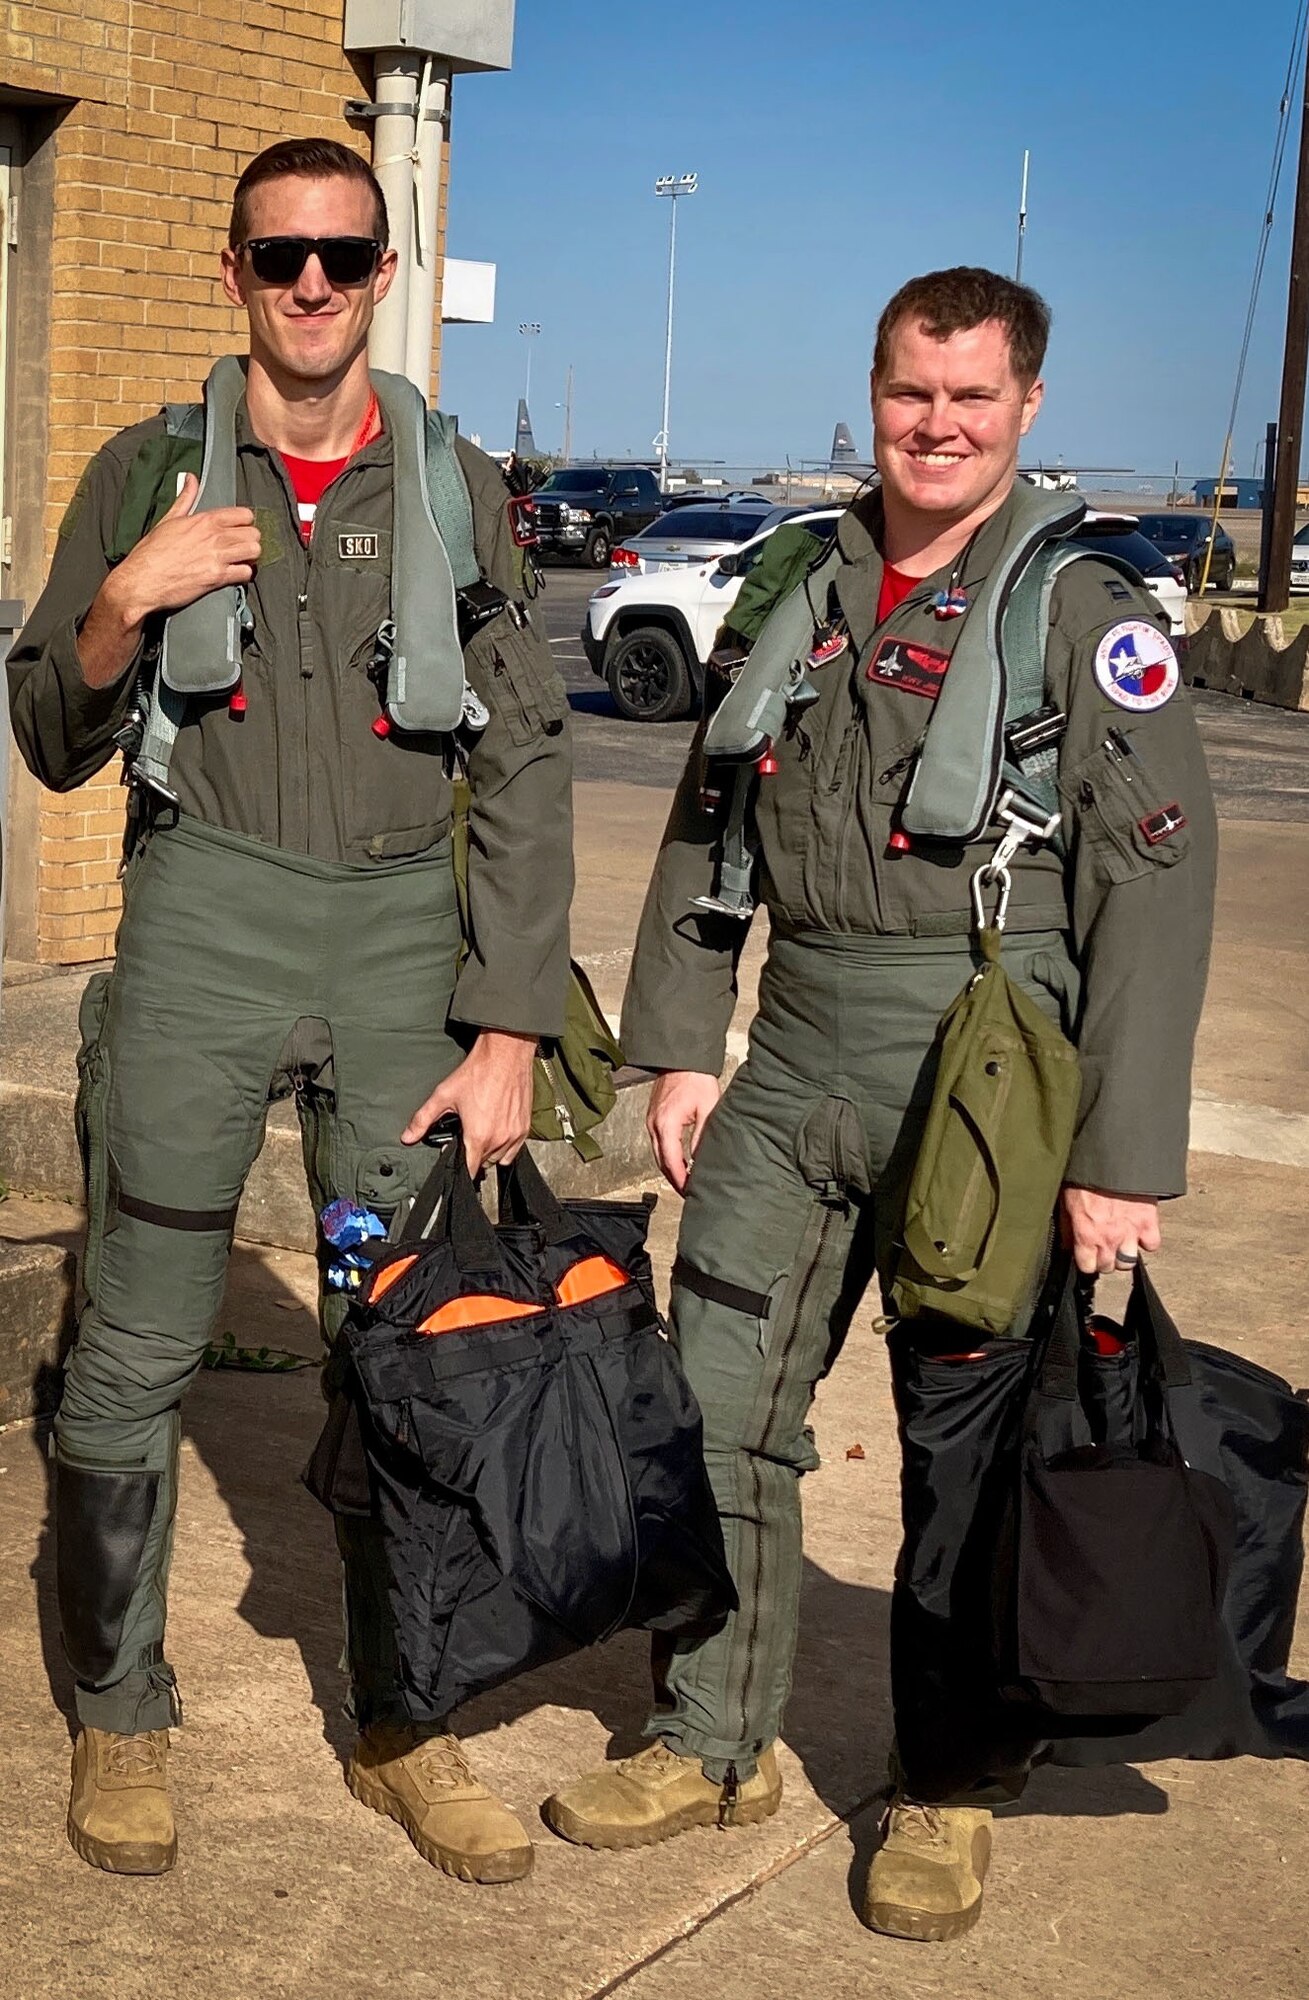 Two pilots from the 457th Fighter Squadron pause prior to performing a memorial flyover for POW and F-16 program founder, Brigadier General Lyle Cameron on August 7 at Dallas Fort Worth National Cemetery. The Spads of the 457 FS have been flying the F-16 Fighting Falcon for more than 25 years. (Courtesy photo)